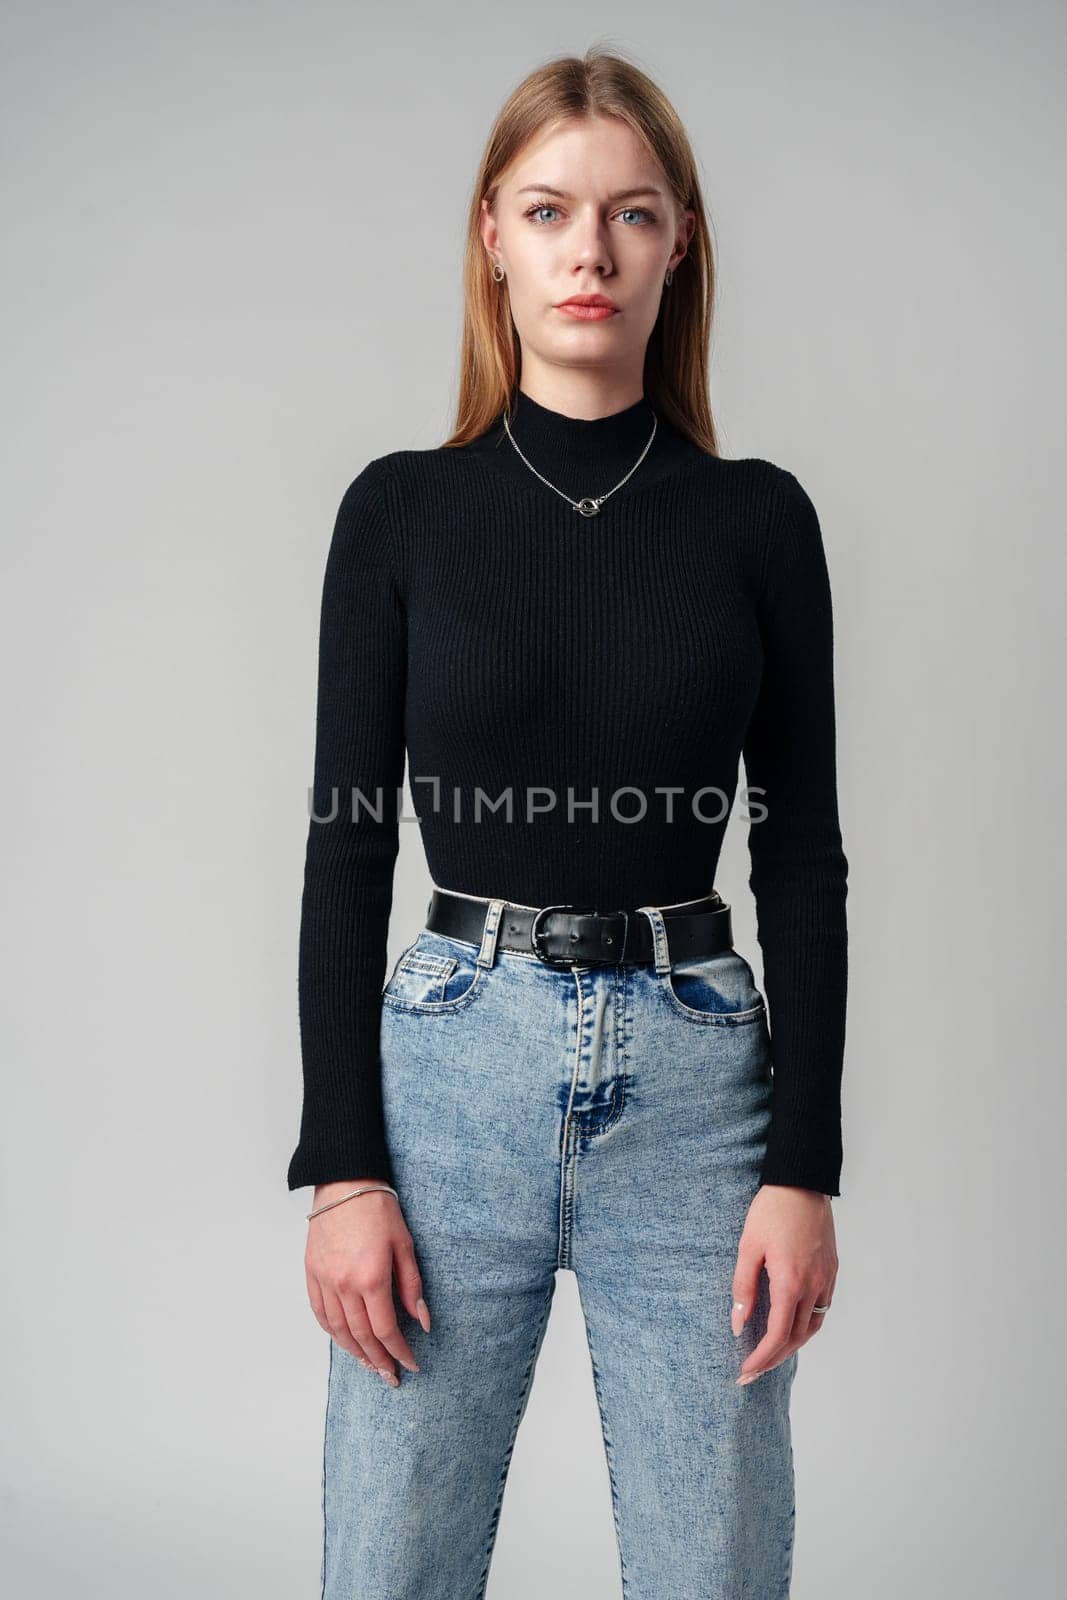 Young Woman Wearing Black Top and Jeans against gray background by Fabrikasimf